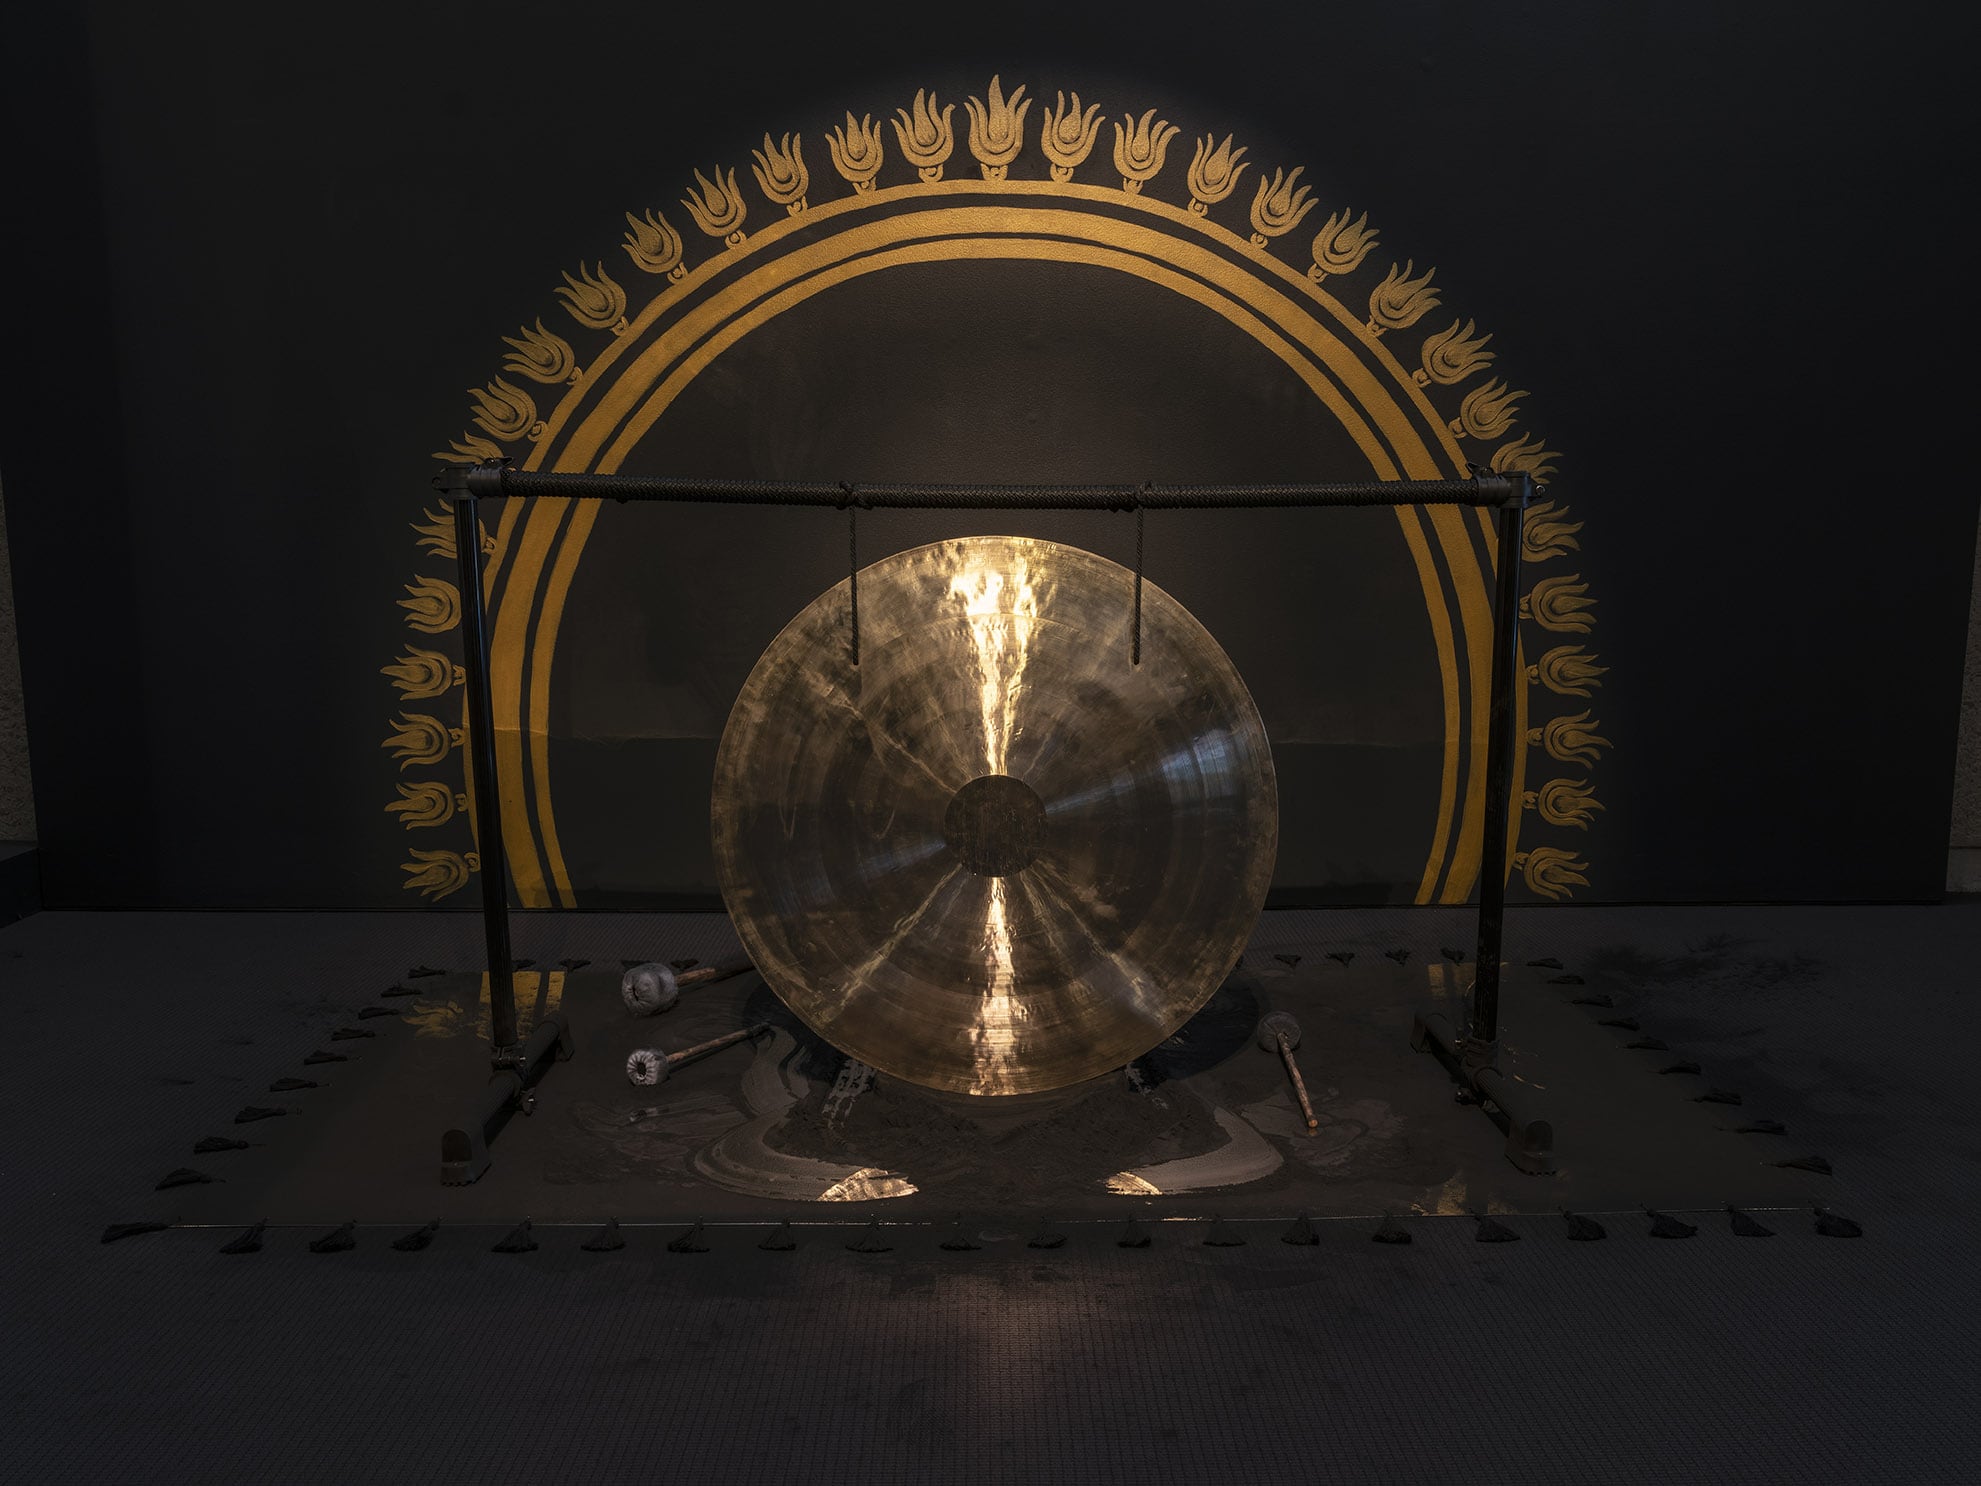 Image 01: Naomi Blacklock, 'Aflame, A Singing Sun' (2019), gong, gong stand, acrylic paint, stainless steel, cotton, charcoal, contact microphones, speakers, mixer. Performance commissioned for Second Sight opening, UQ Art Museum, 1 March 2019. Courtesy of the artist. Photo: Carl Warner